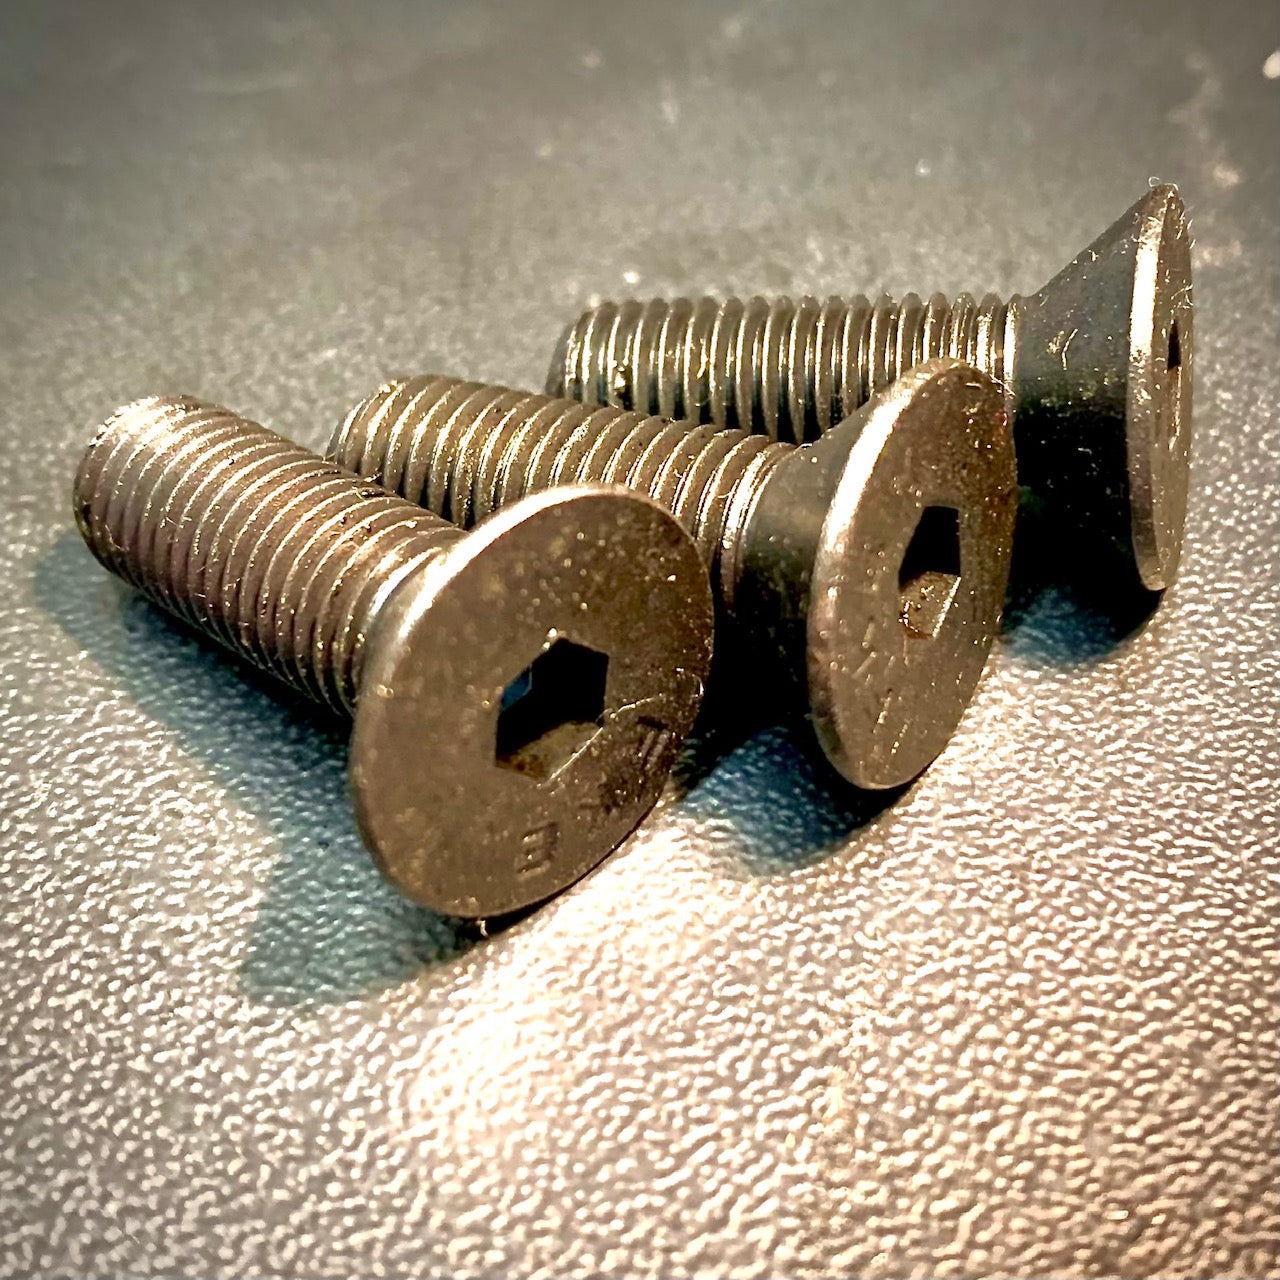 UNF 3/8" Socket Screw Countersunk High Tensile 10.9 DIN7991 - Fixaball Ltd. Fixings and Fasteners UK